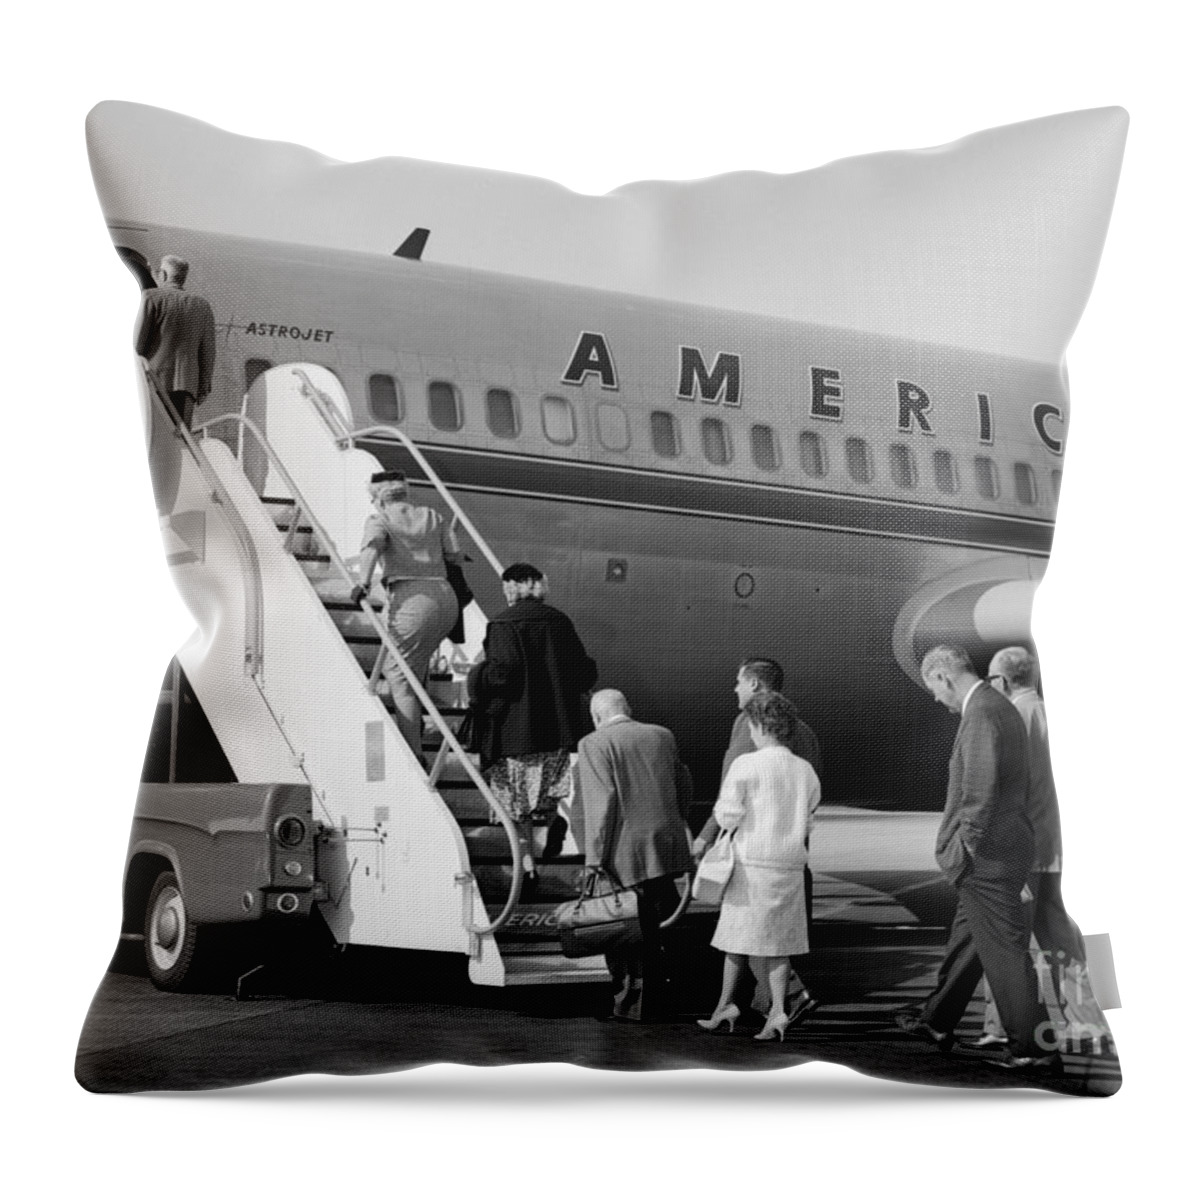 1960s Throw Pillow featuring the photograph Boarding American Airlines by H. Armstrong Roberts/ClassicStock